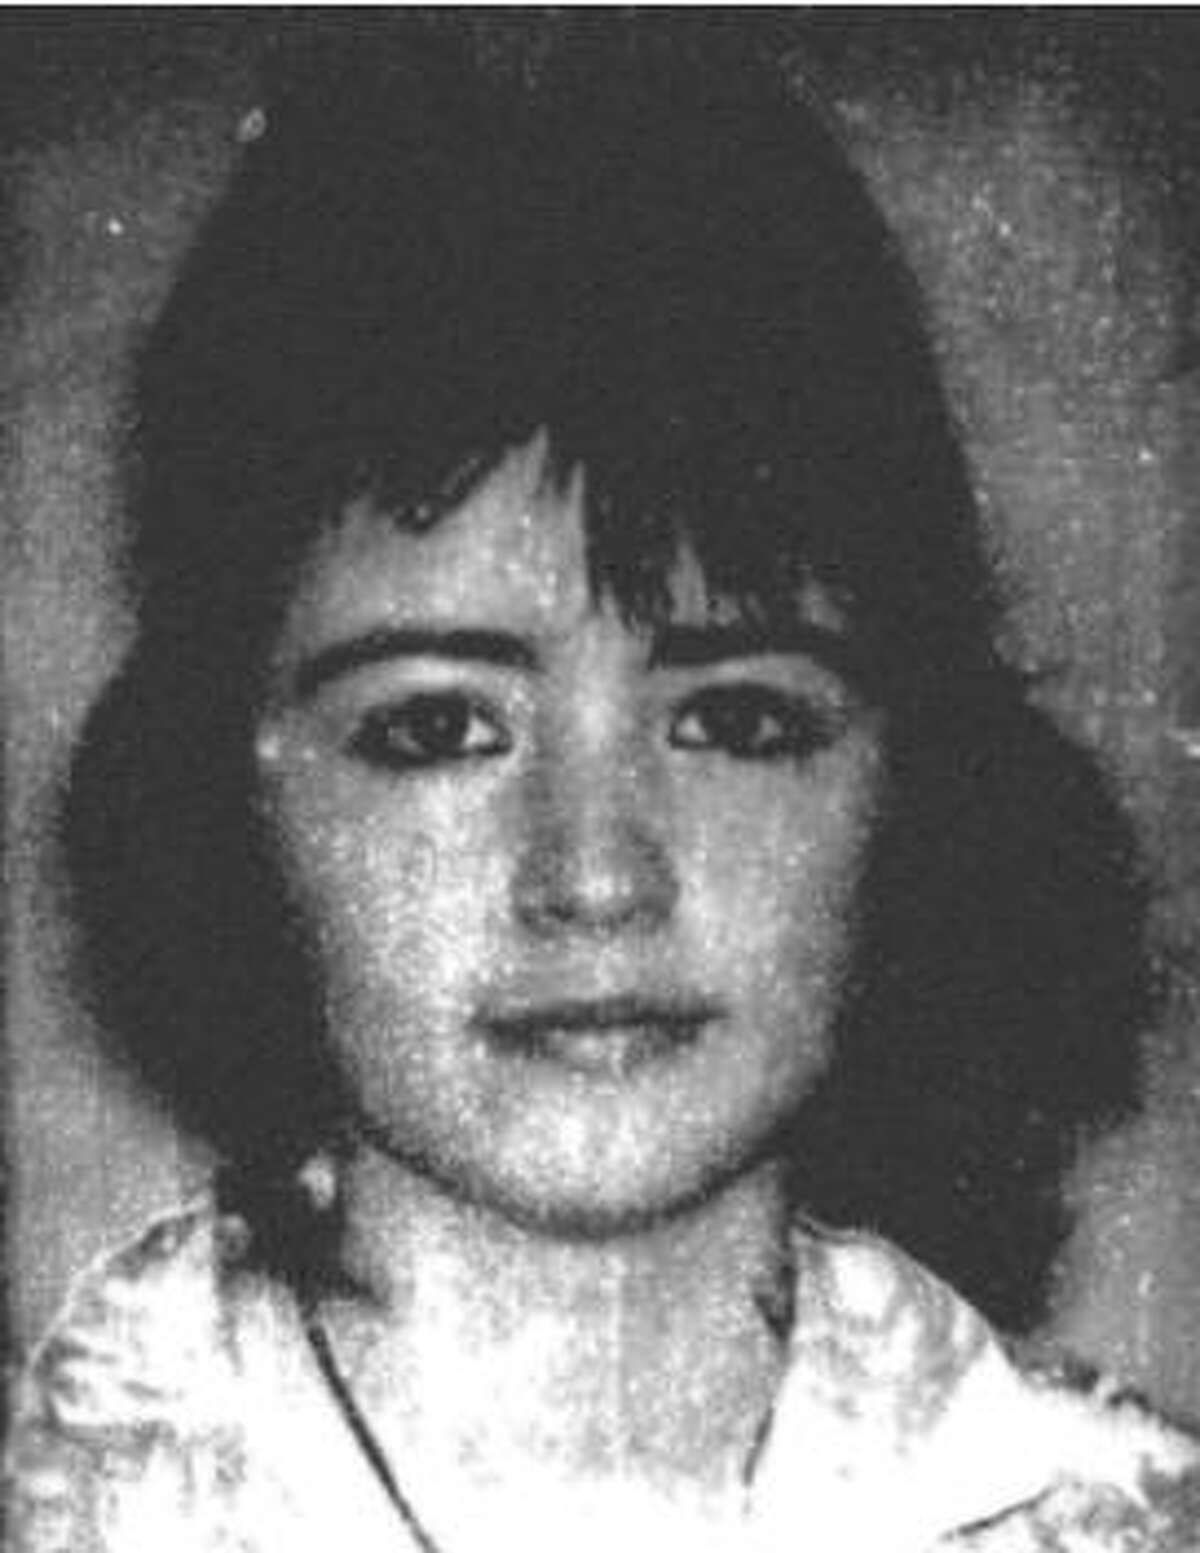 Sally McNelly (pictured) and Shane Stewart went missing on July 4, 1988, while going to a fireworks display at Lake Nasworthy. Their skeletal remains were found in November near Twin Buttes Reservoir, with their autopsies showing they both died from gunshot wounds, the San Angelo Standard-Times reported.